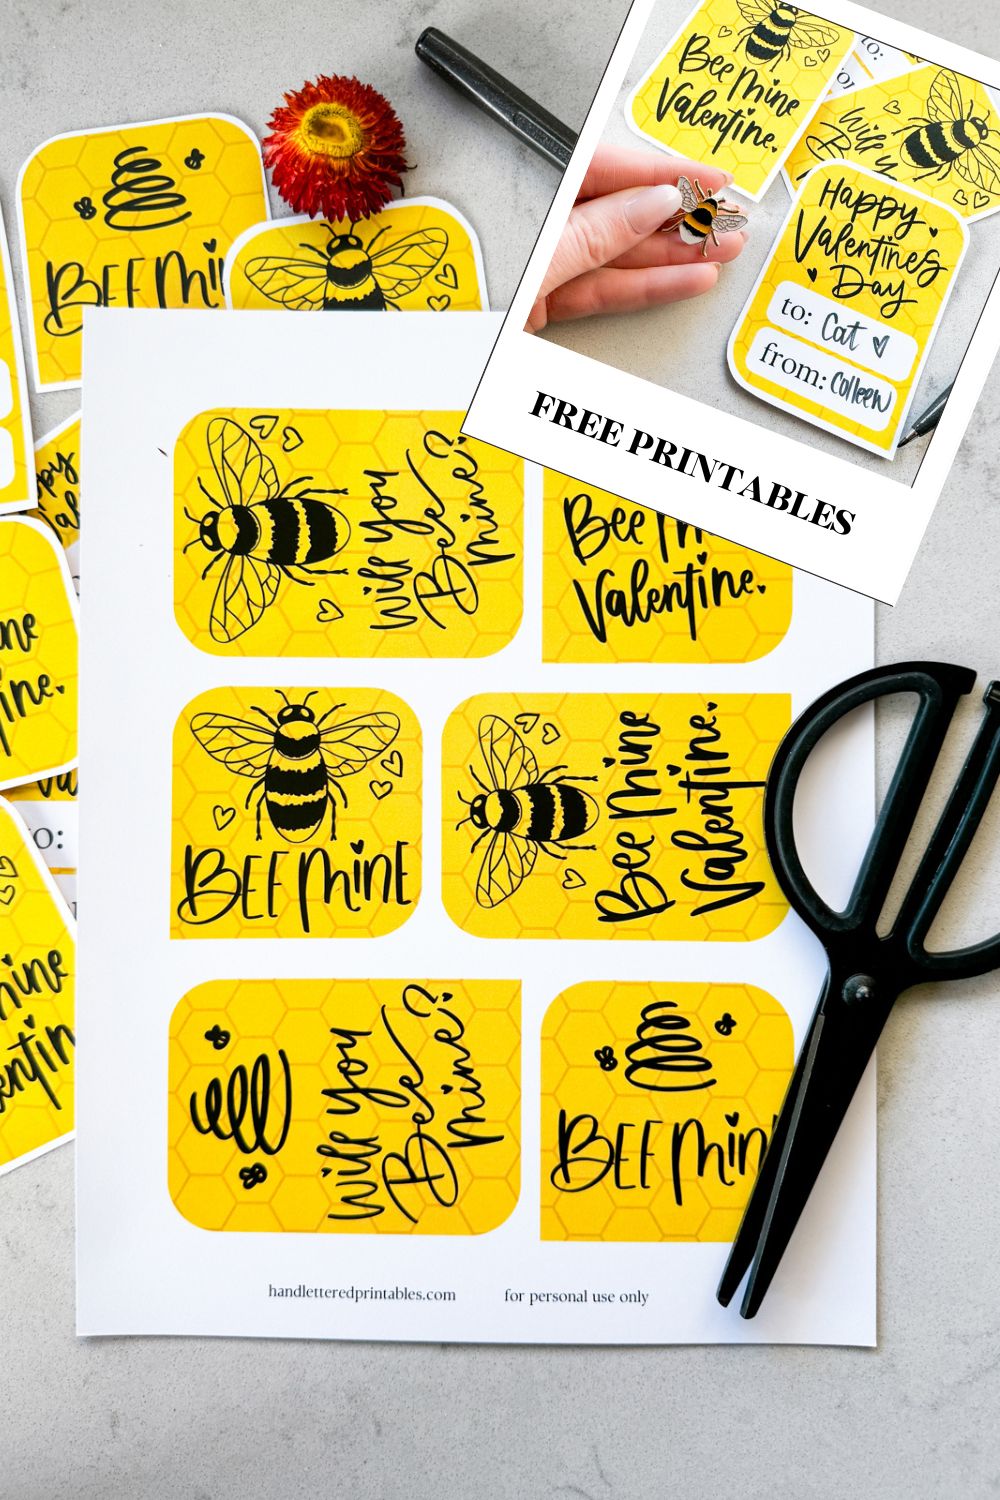 image of printed bee themed valentines cards on marble counter, all ready to be cut out. valentines cards read: bee mine, will you bee mine, and bee mine valentine with illustrations of a bee and of a line art bee hive. reverse has space for names and says 'happy valentines day'. all hand lettered in black ink with yellow honeycomb background image overlay reads 'free printables'